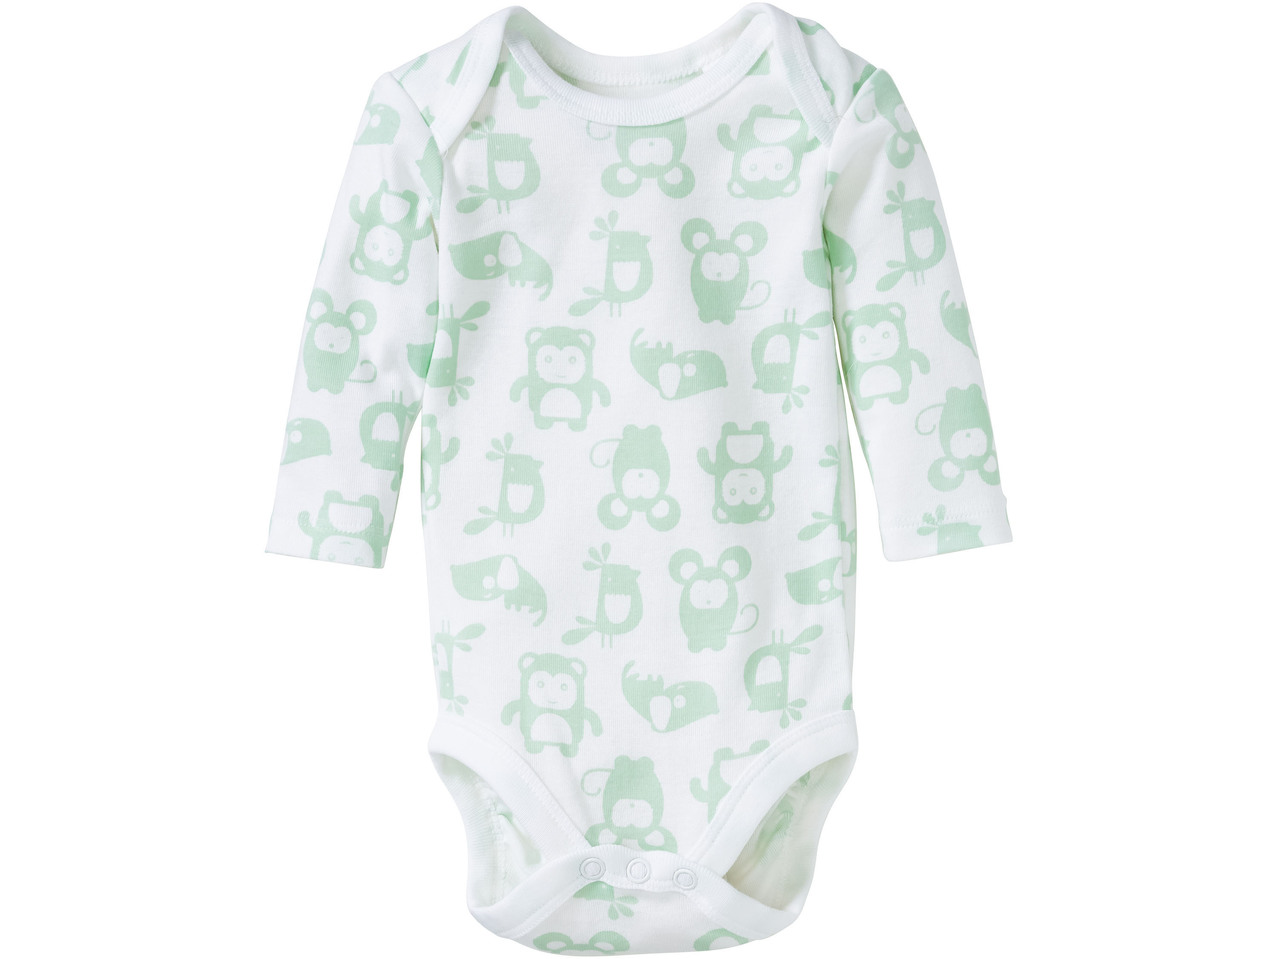 Baby Long-Sleeve Bodysuits, 5 pieces